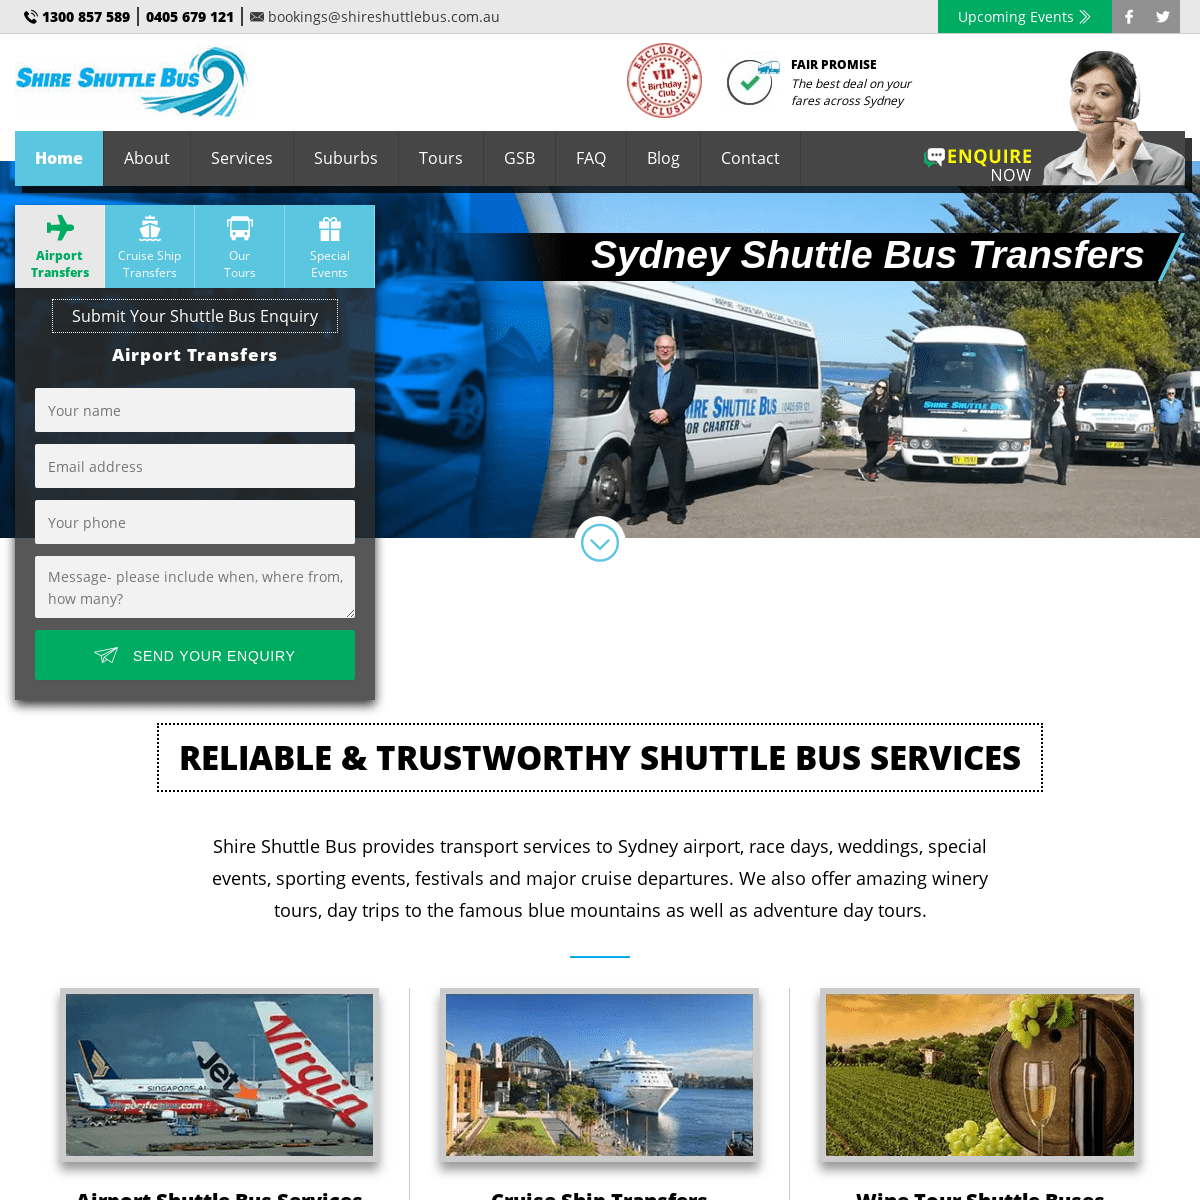 Sydney Airport & Cruise Ship Shuttle Bus Transfers & Day Tours | Shire Shuttle Bus